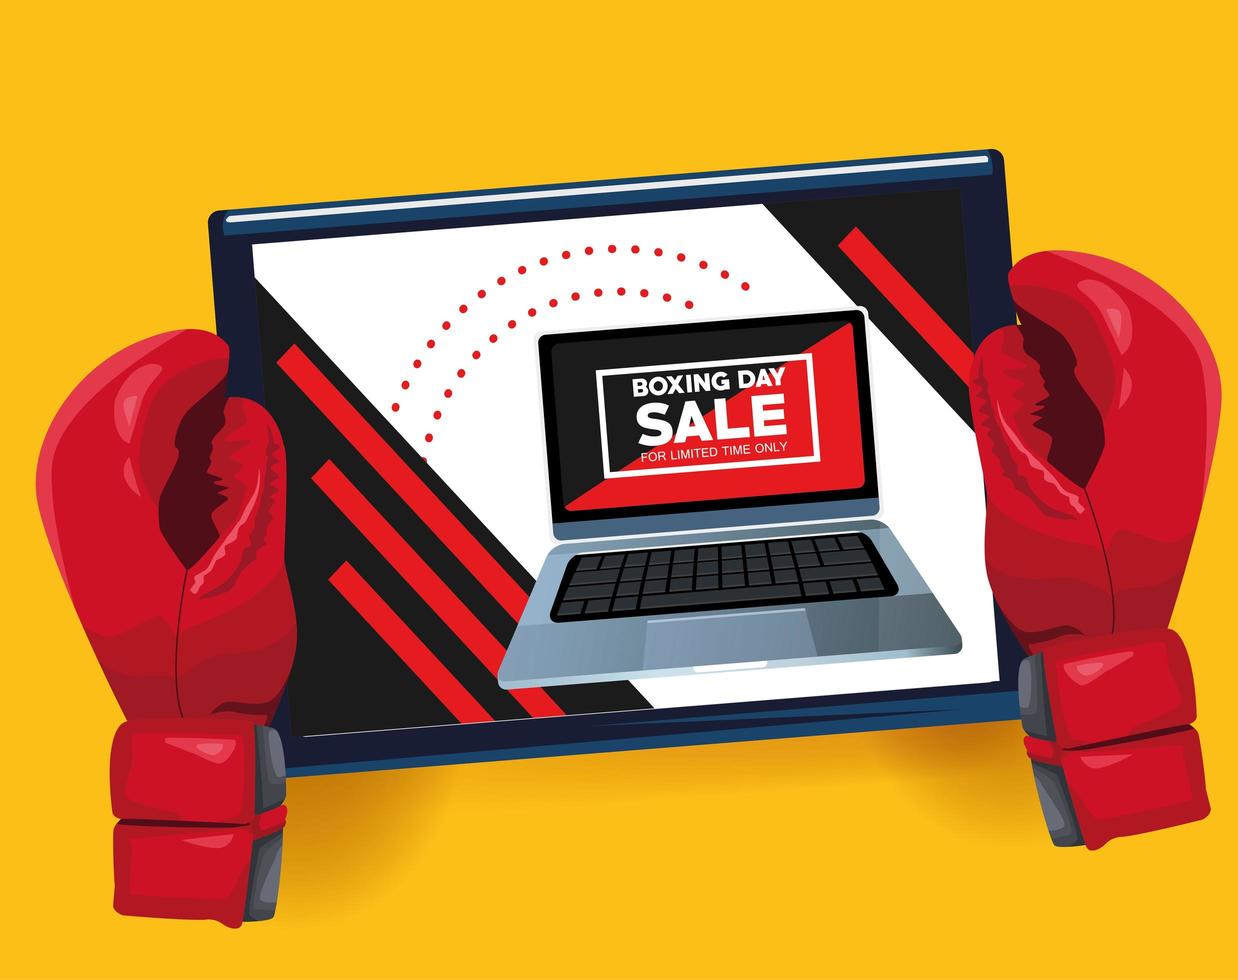 boxing day sale poster with laptop and gloves vector